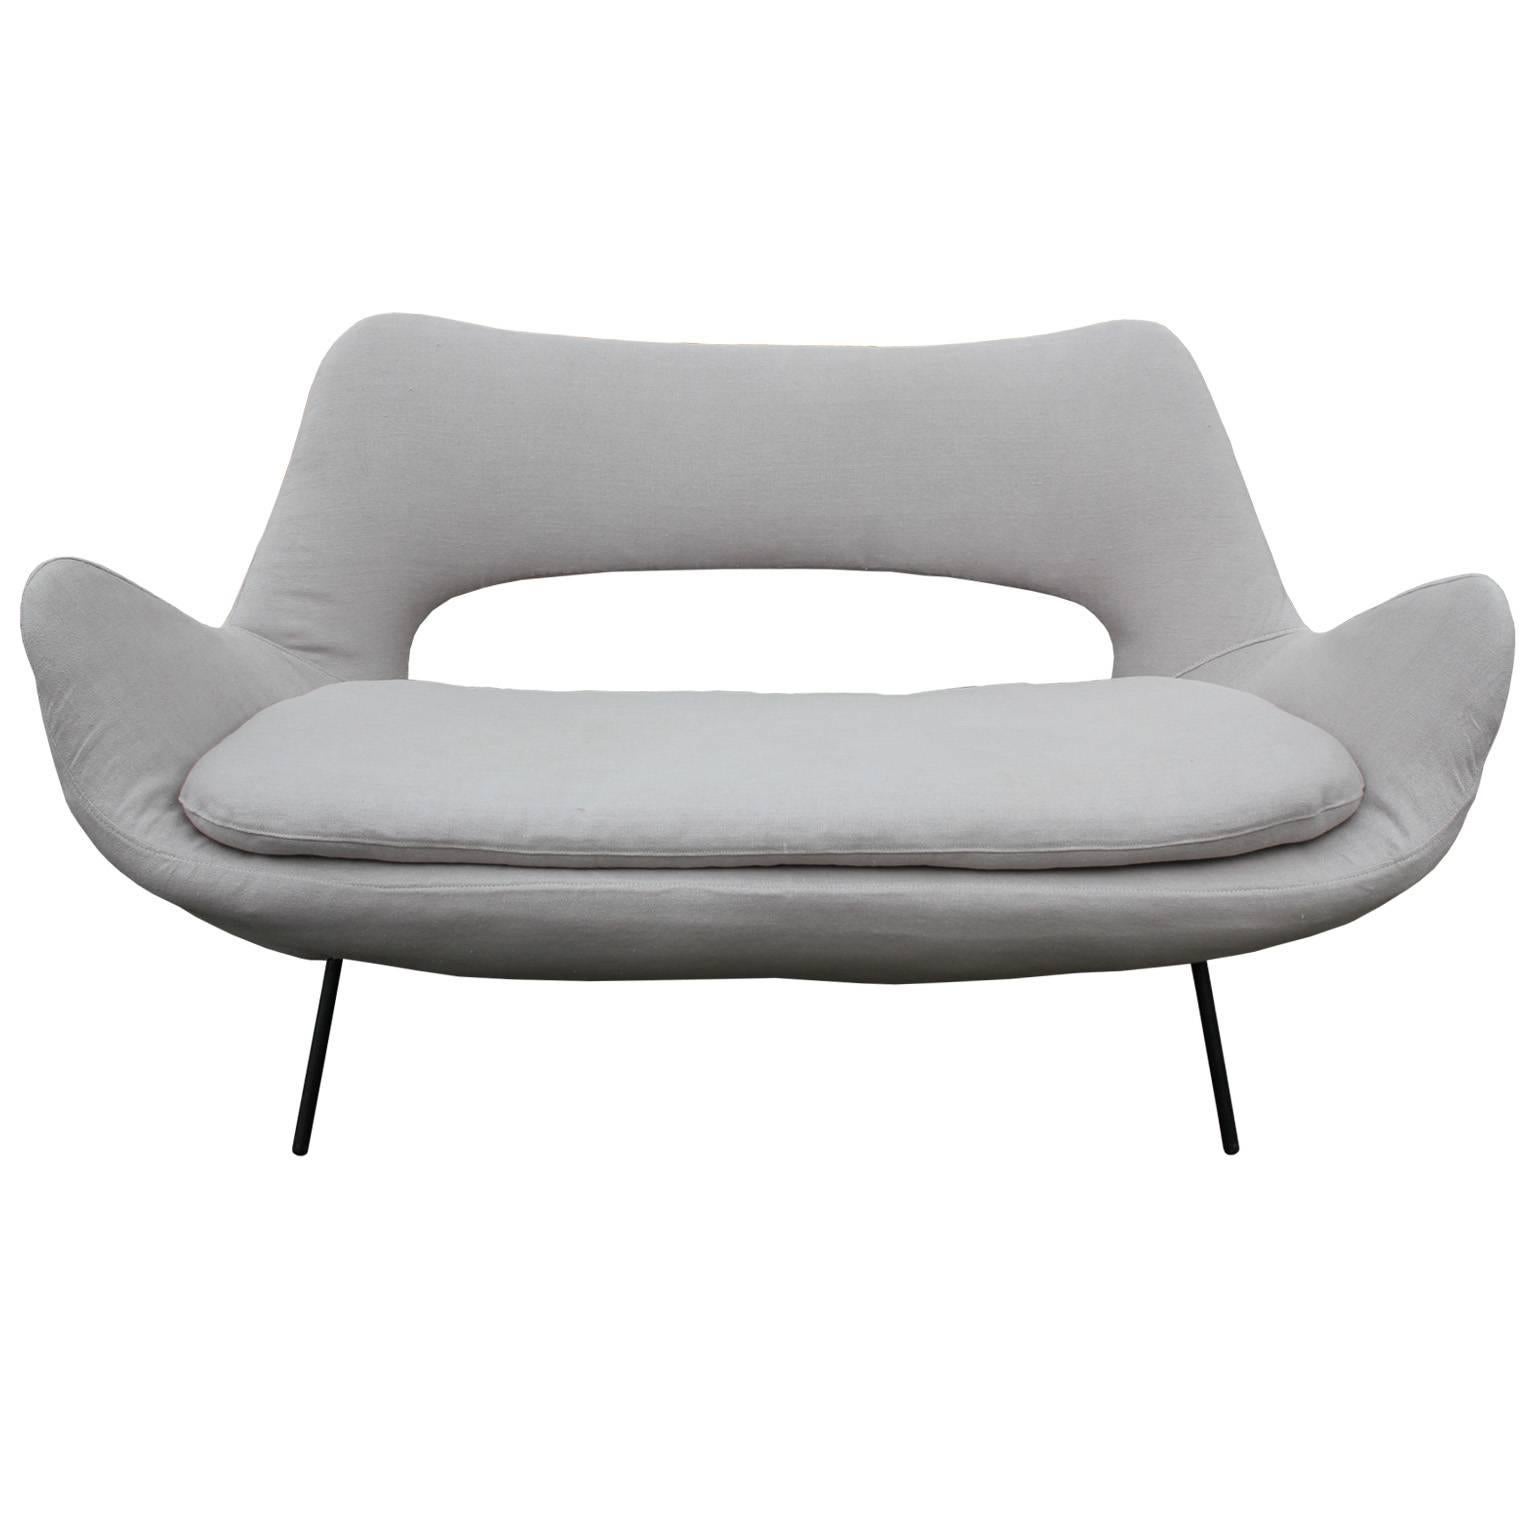 Incredible loveseat or small sofa. Loveseat has wonderful sculptural lines and negative space reminiscent of Arne Jacobsen. Freshly upholstered in a hand-stitched grey linen. Finished with tubular black metal legs. Perfect in a modern, Scandinavian,